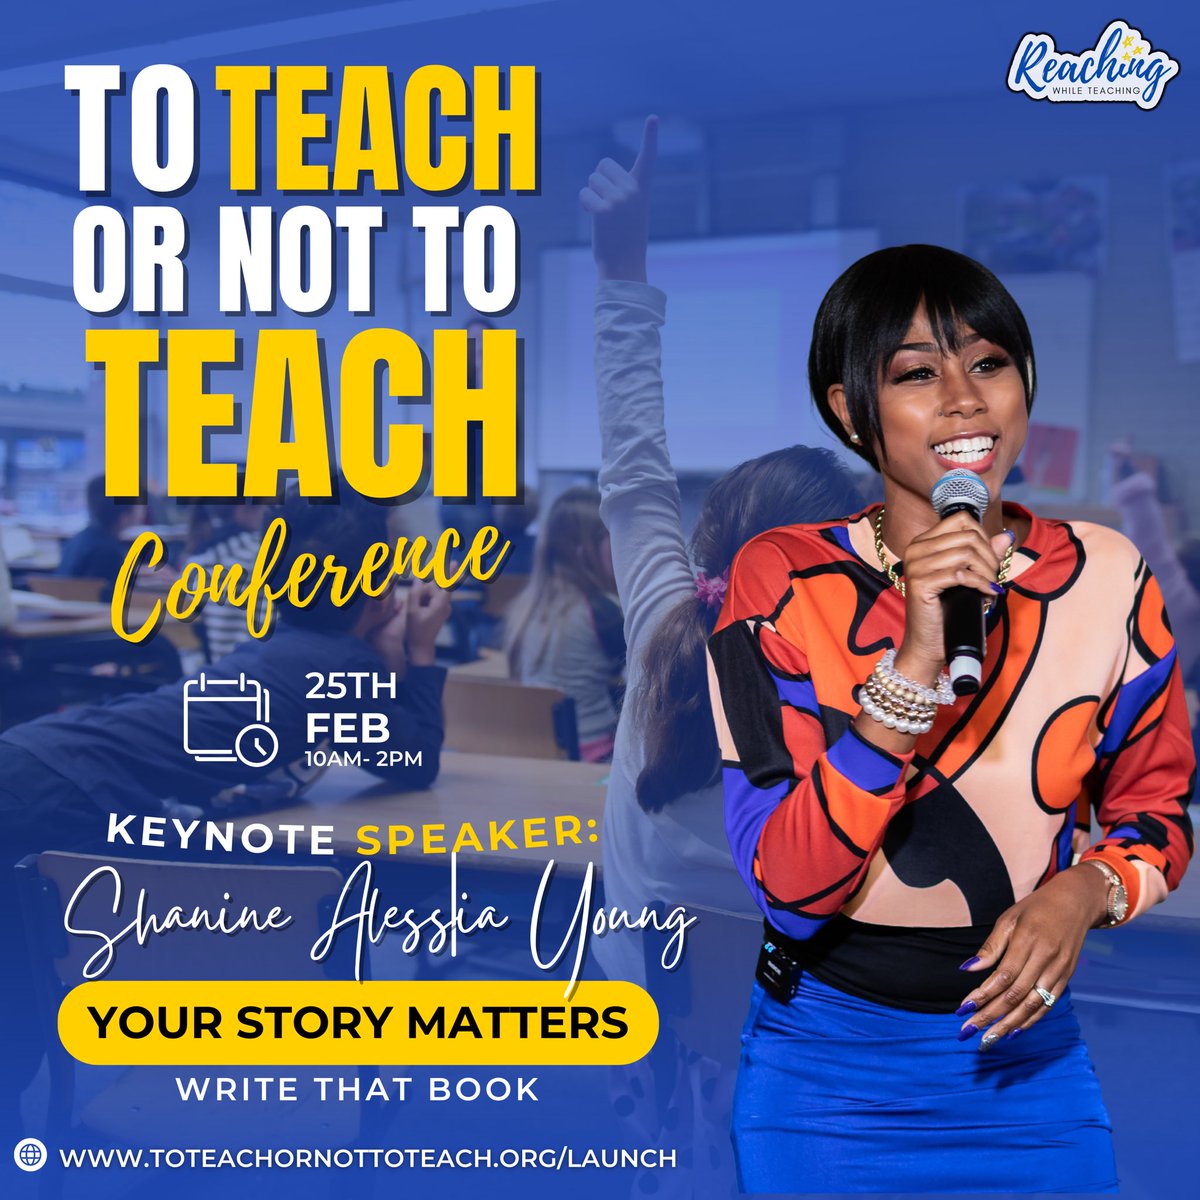 It’s going down Saturday! Grab your free ticket here toteachornottoteach.org/launch